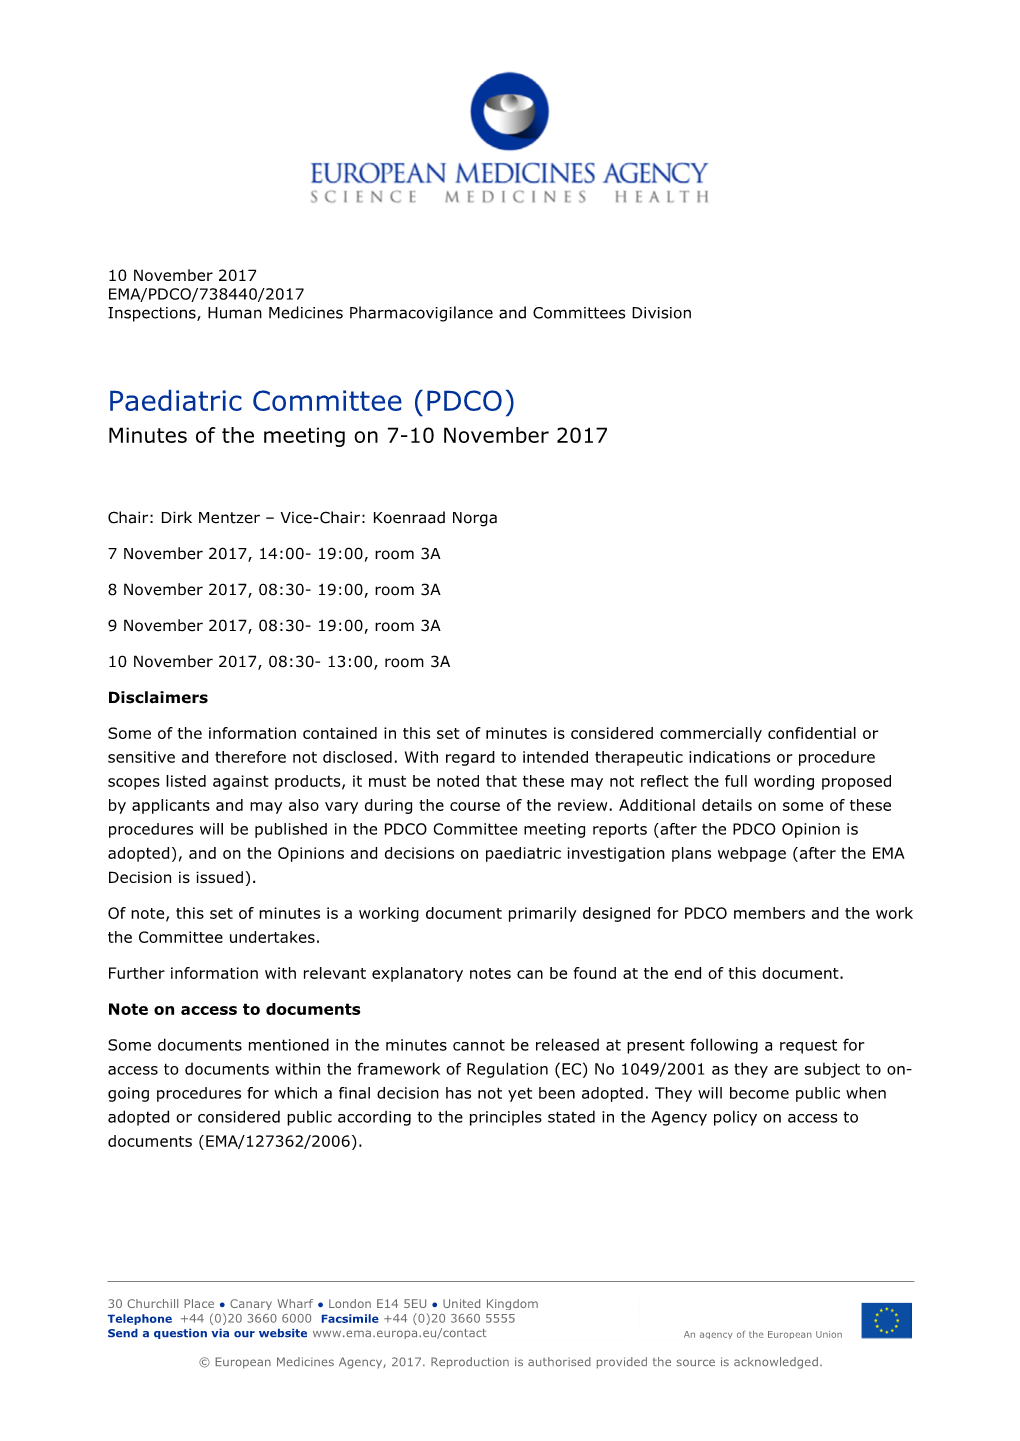 PDCO Minutes of the 7-10 November 2017 Meeting